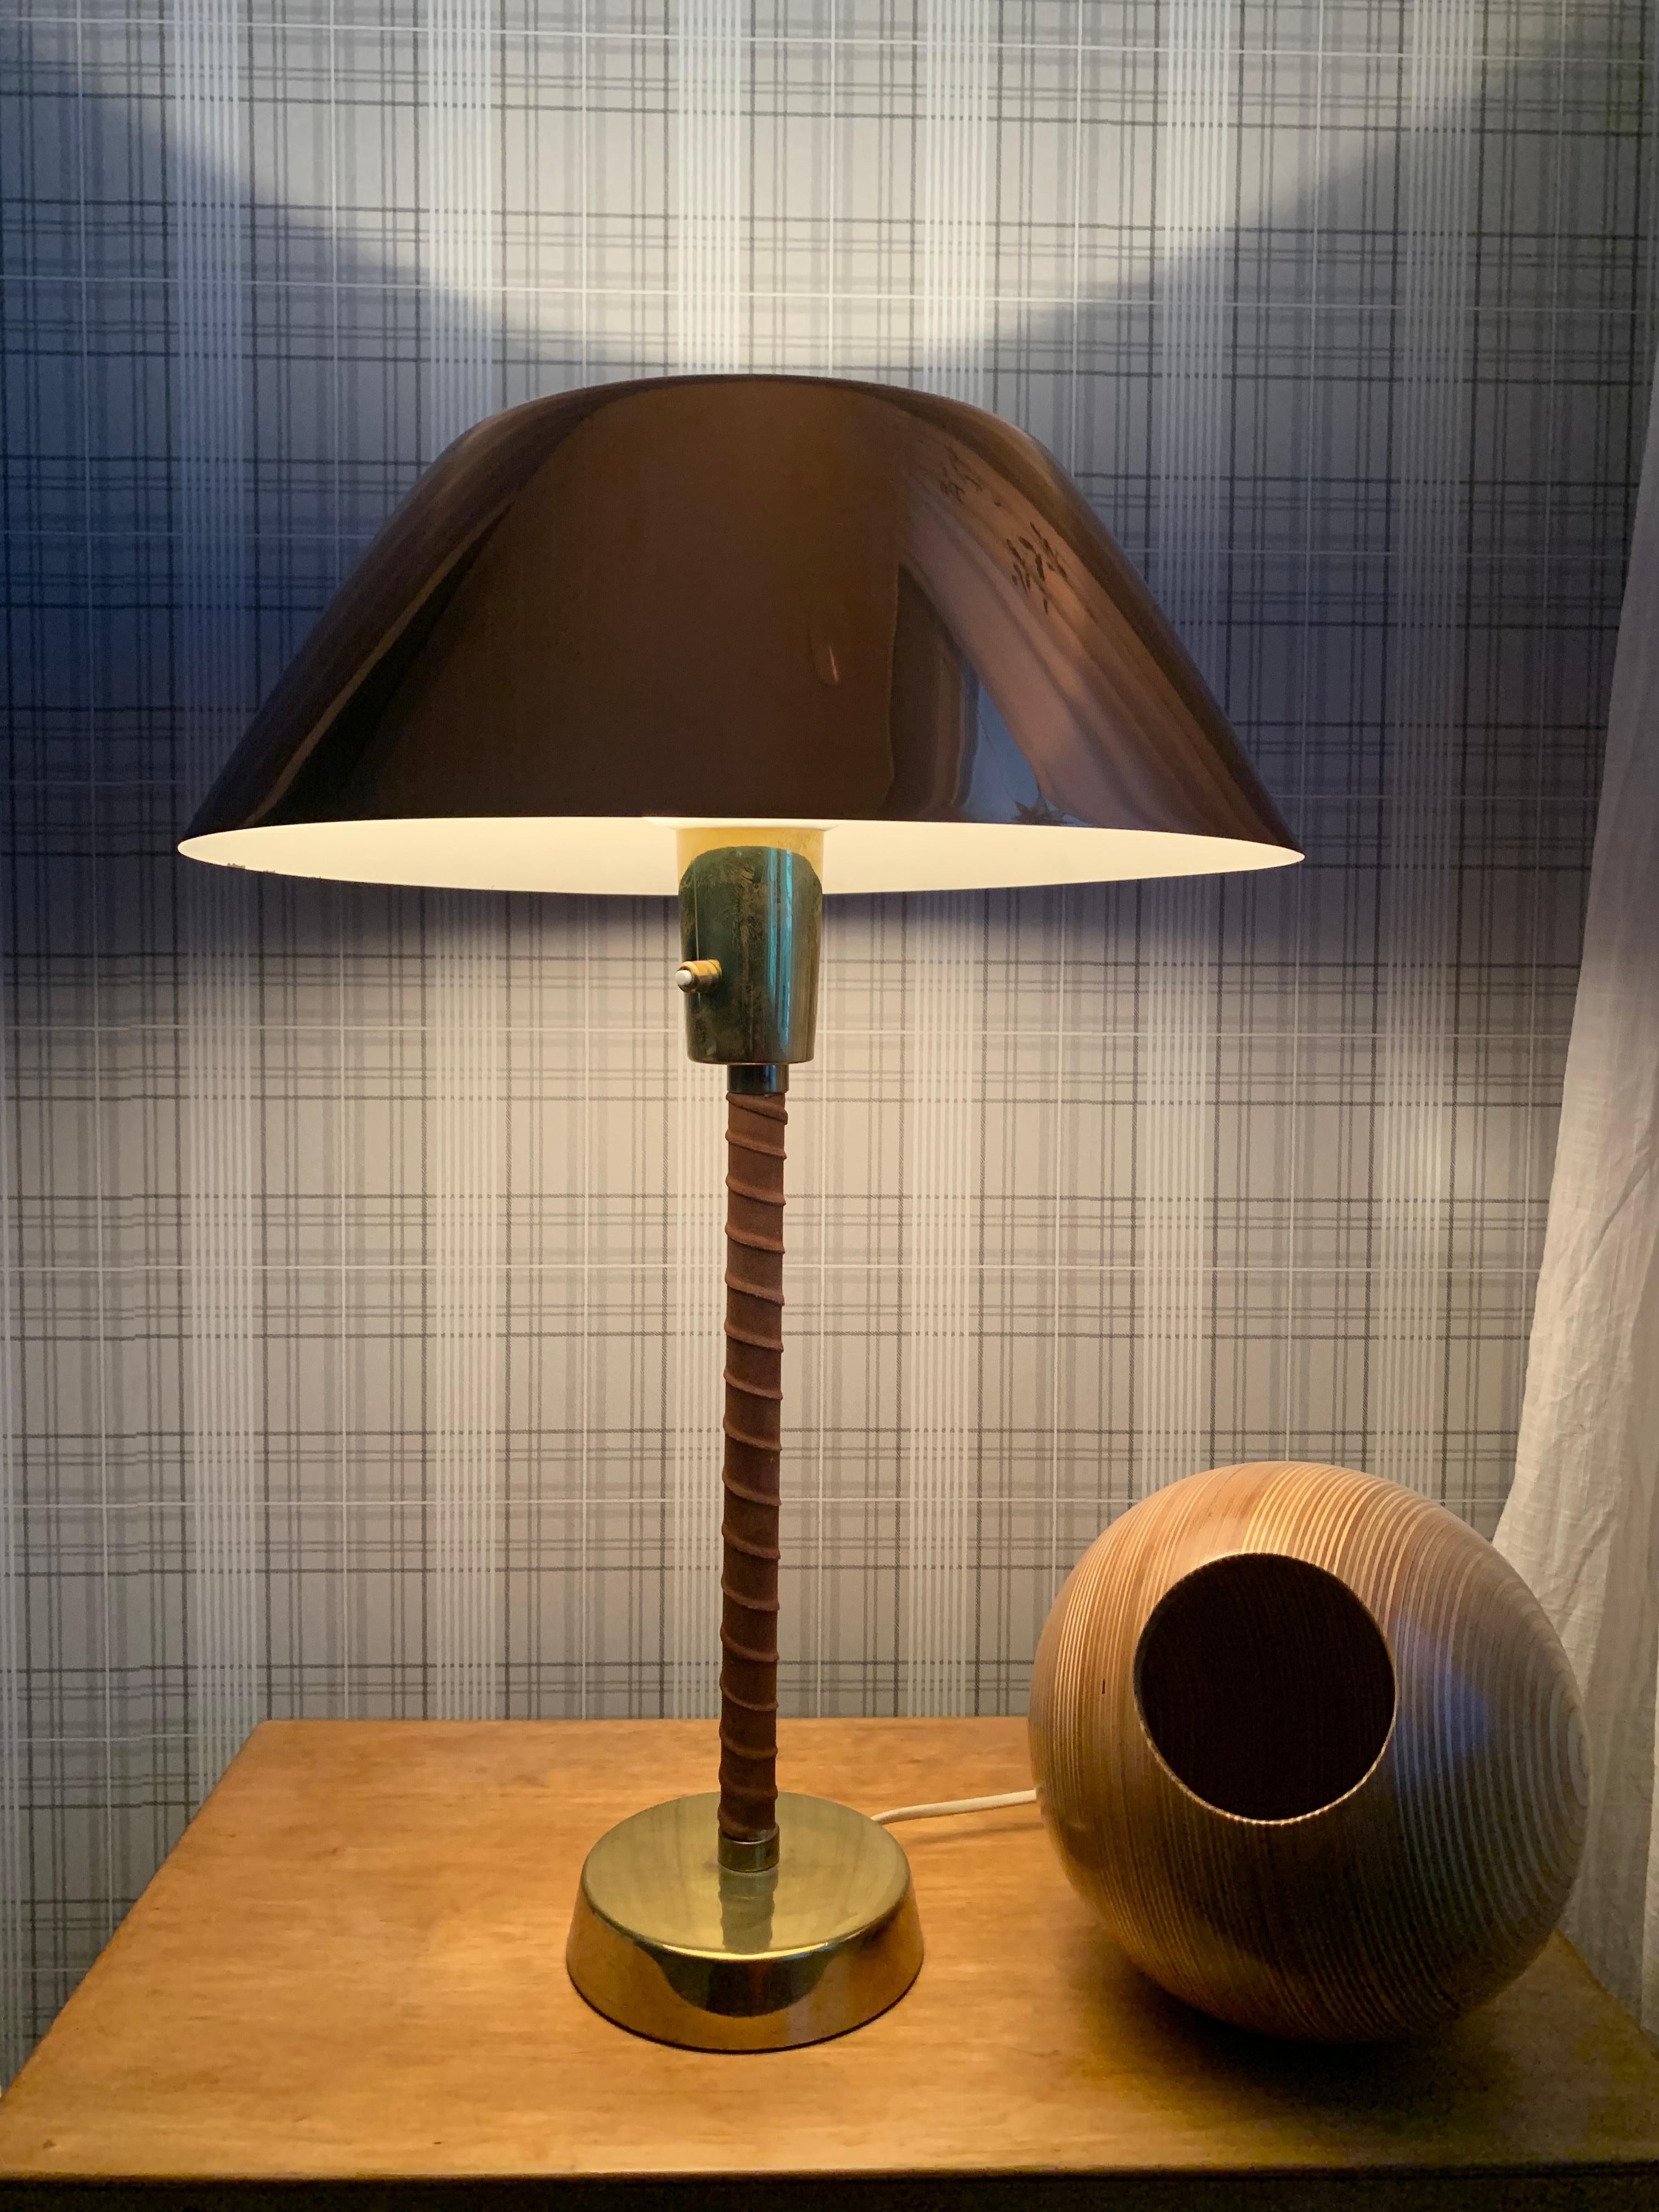 Table lamp, called Senator or model 940025, designed by Lisa Johansson-Pape and manufactured by Orno in Finland, around 1948. Made of copper shade, brass and leather.
Note: The lamp must be installed professionally according to local requirements.